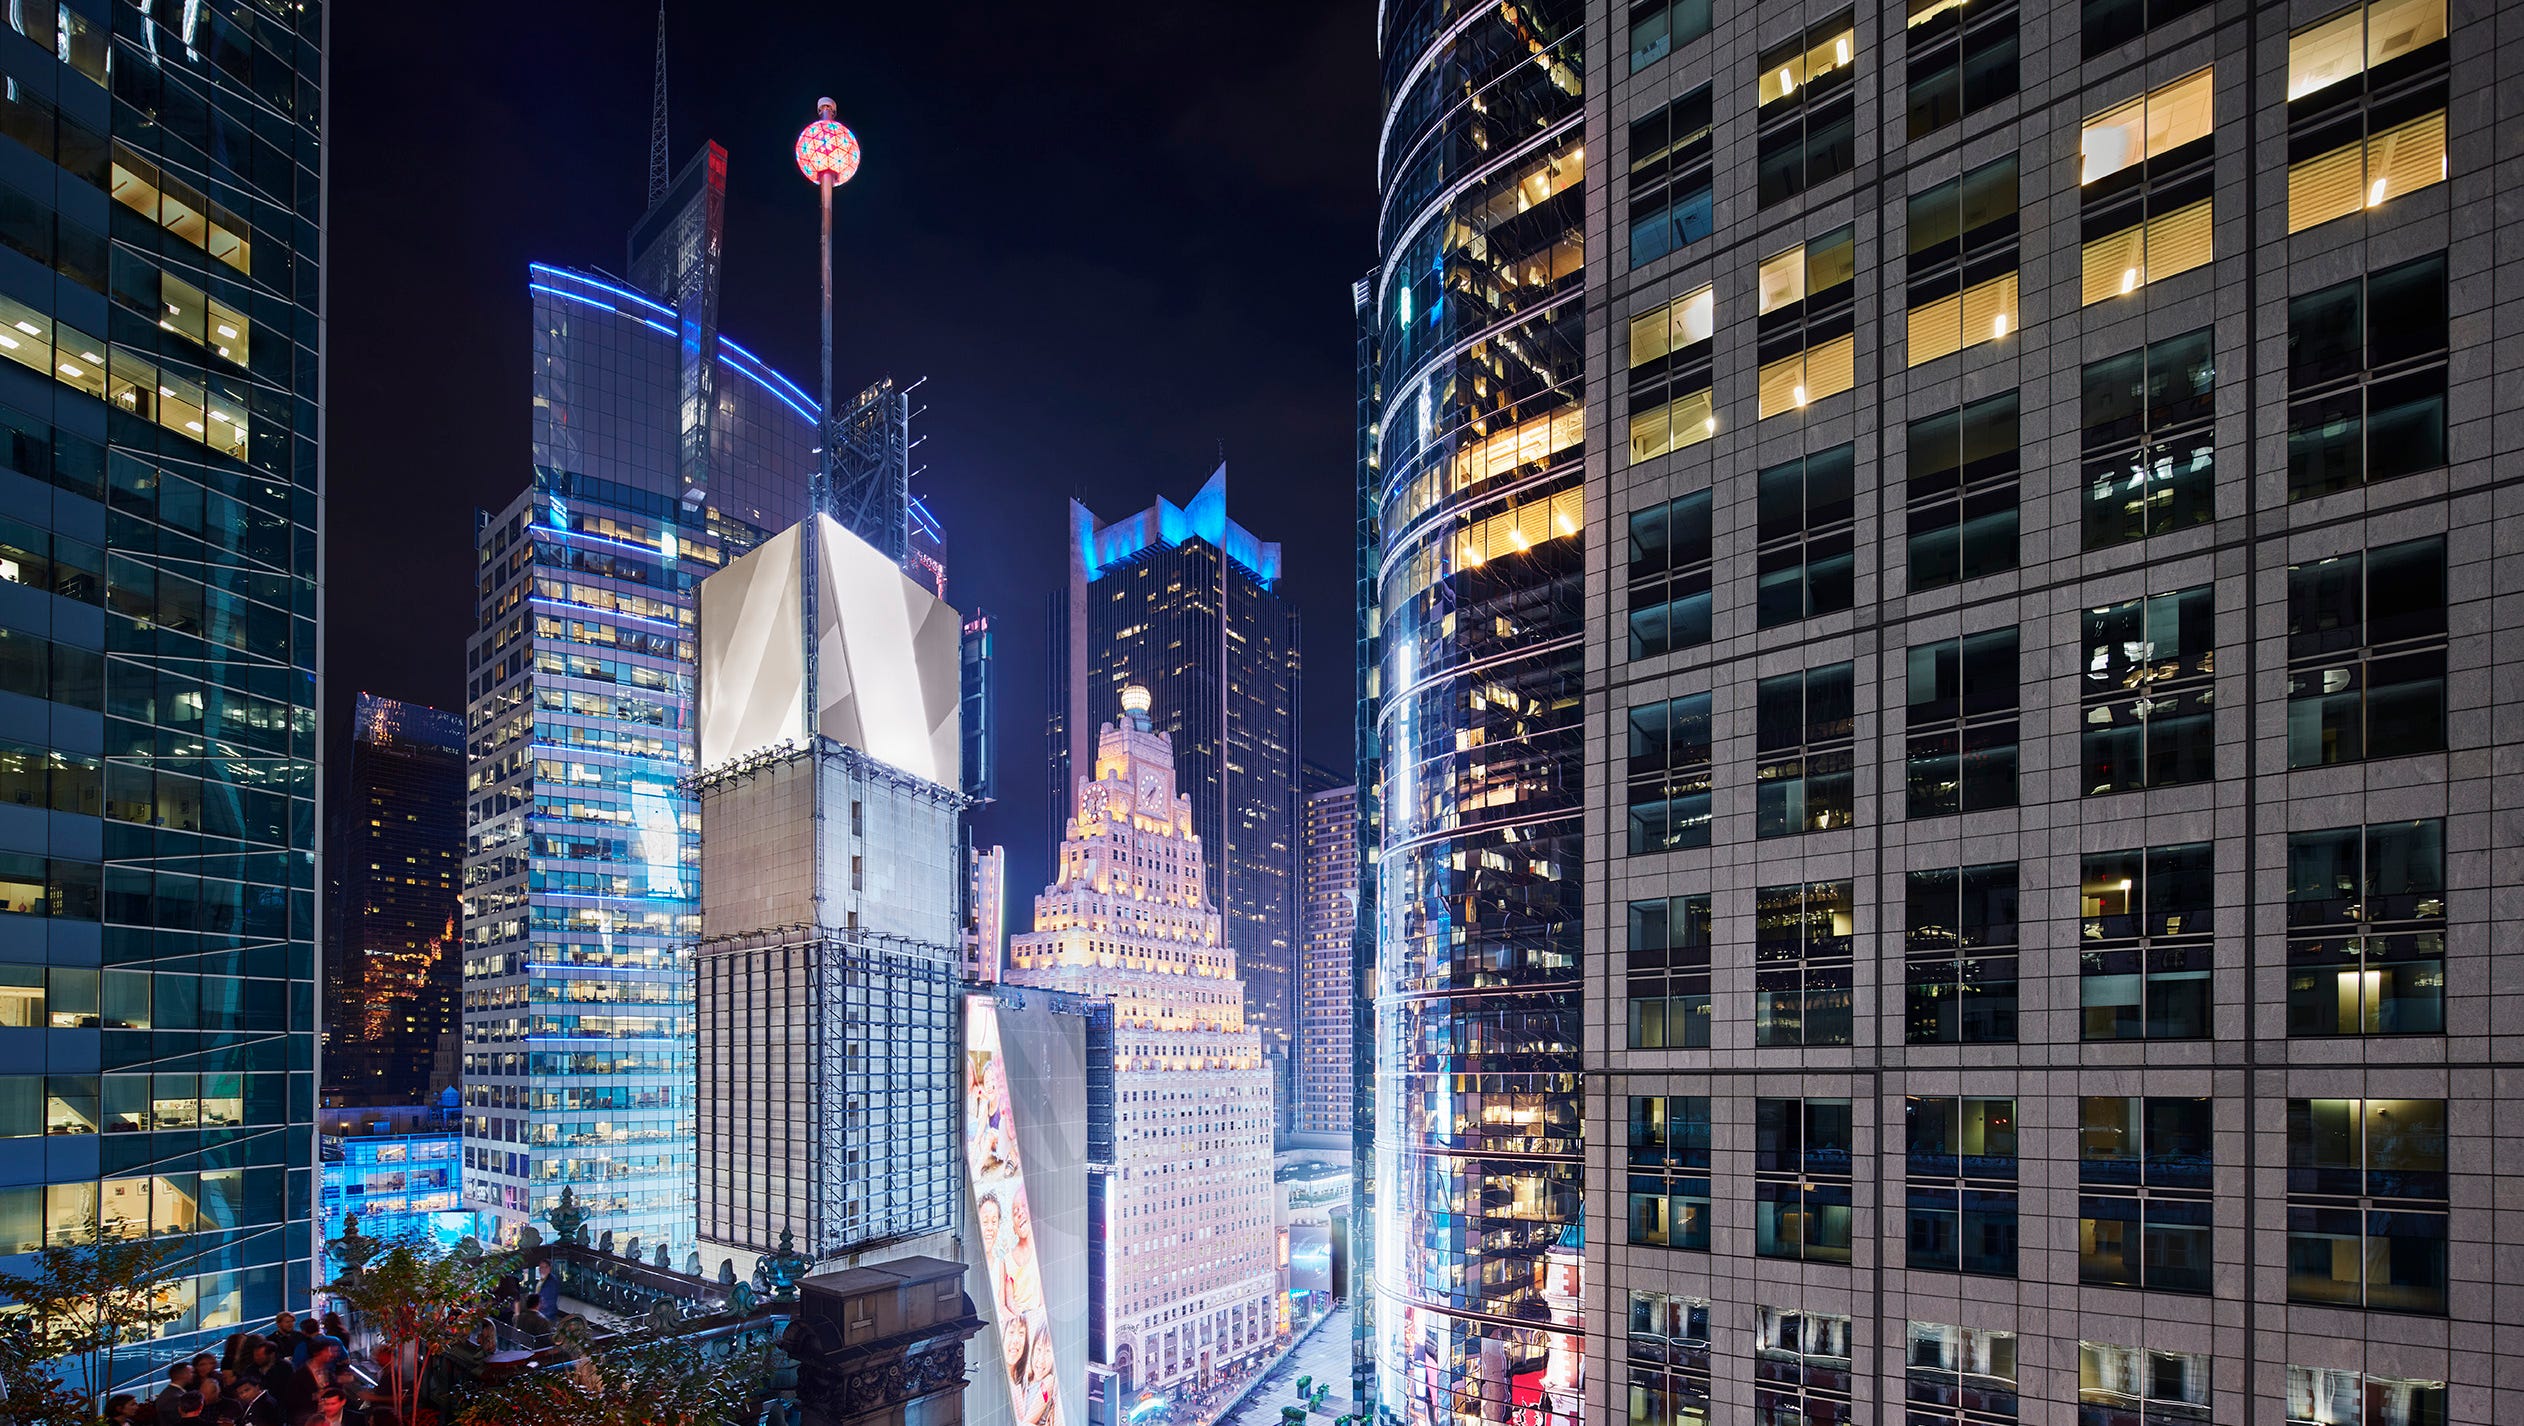 Take a front row seat for the celebration in Times Square with the St. Cloud Rooftop Experience at The Knickerbocker Hotel.